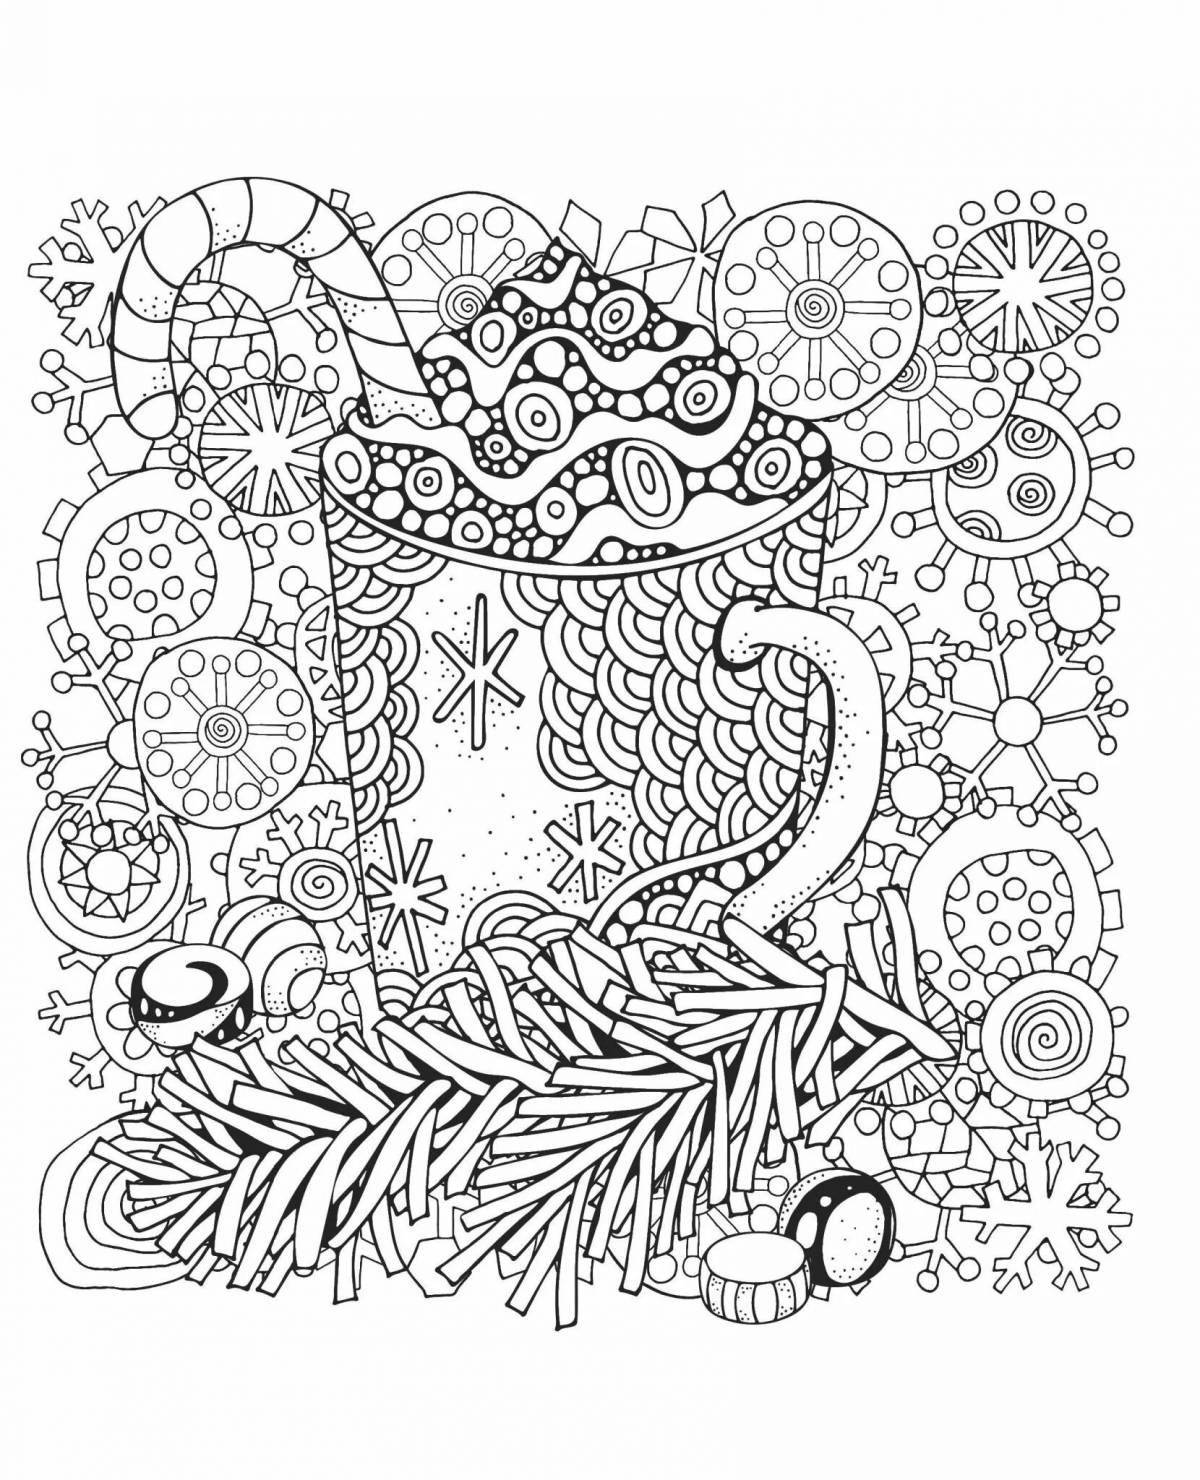 Whimsical anti-stress winter coloring book for kids